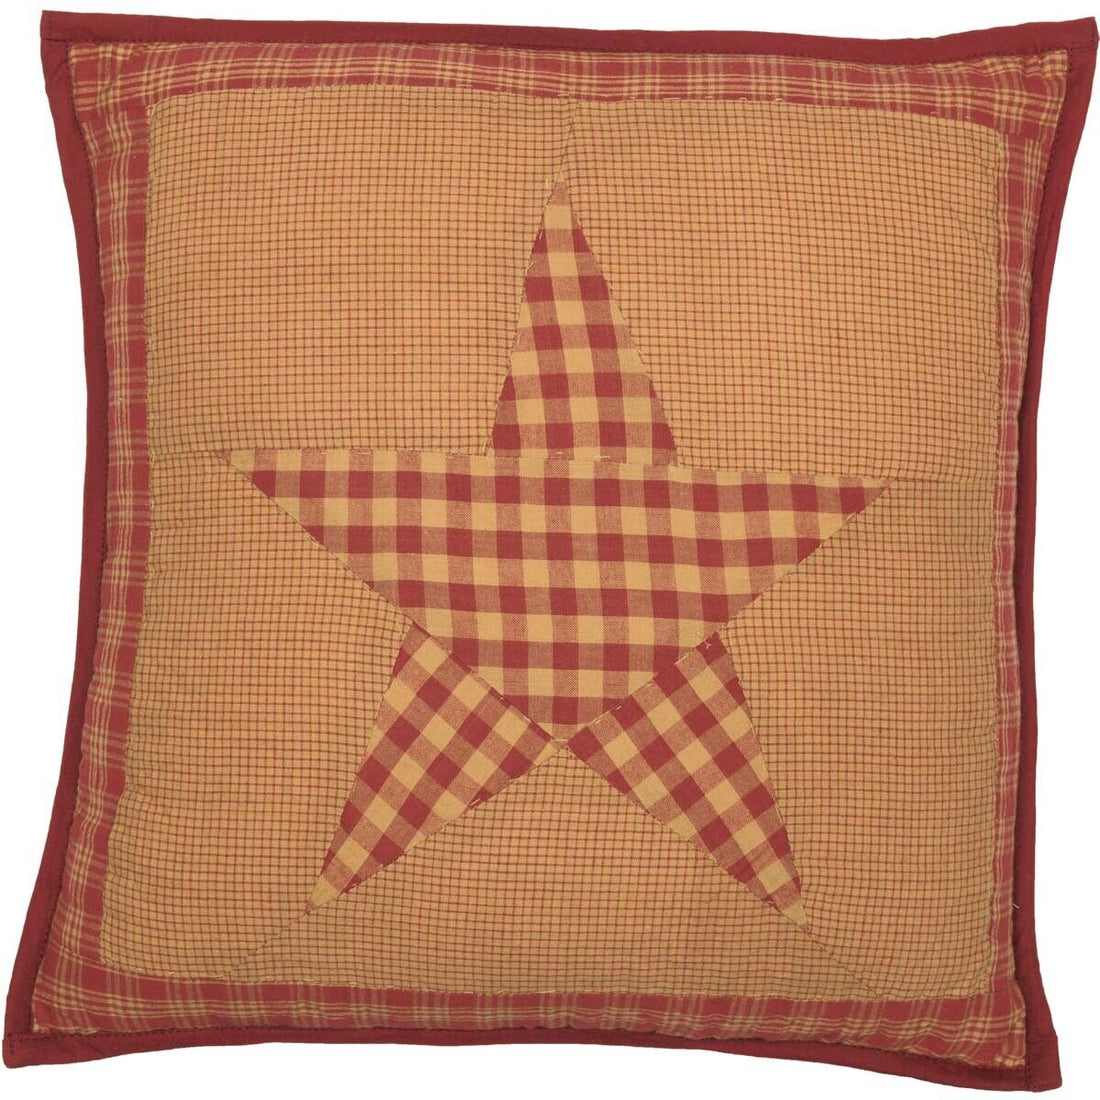 Primitive Farmhouse 9 Star Patch Quilted Accent Pillow w/ Fill 16x16&quot; - The Primitive Pineapple Collection